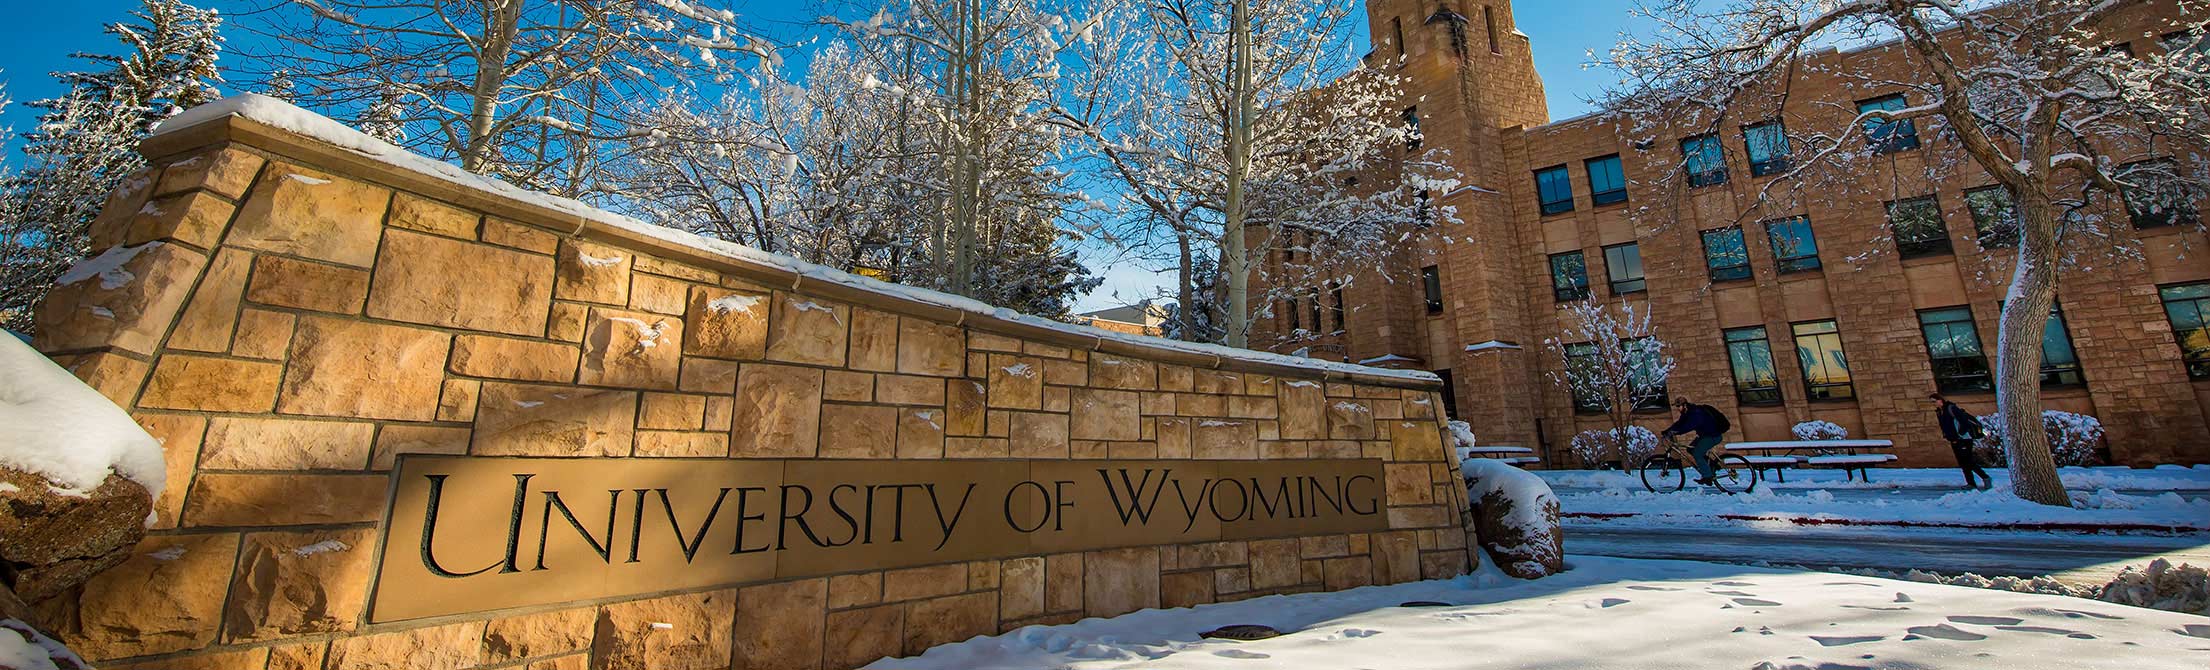 Image of "University of Wyoming" sign in foreground of West Entrance to the Wyoming Union